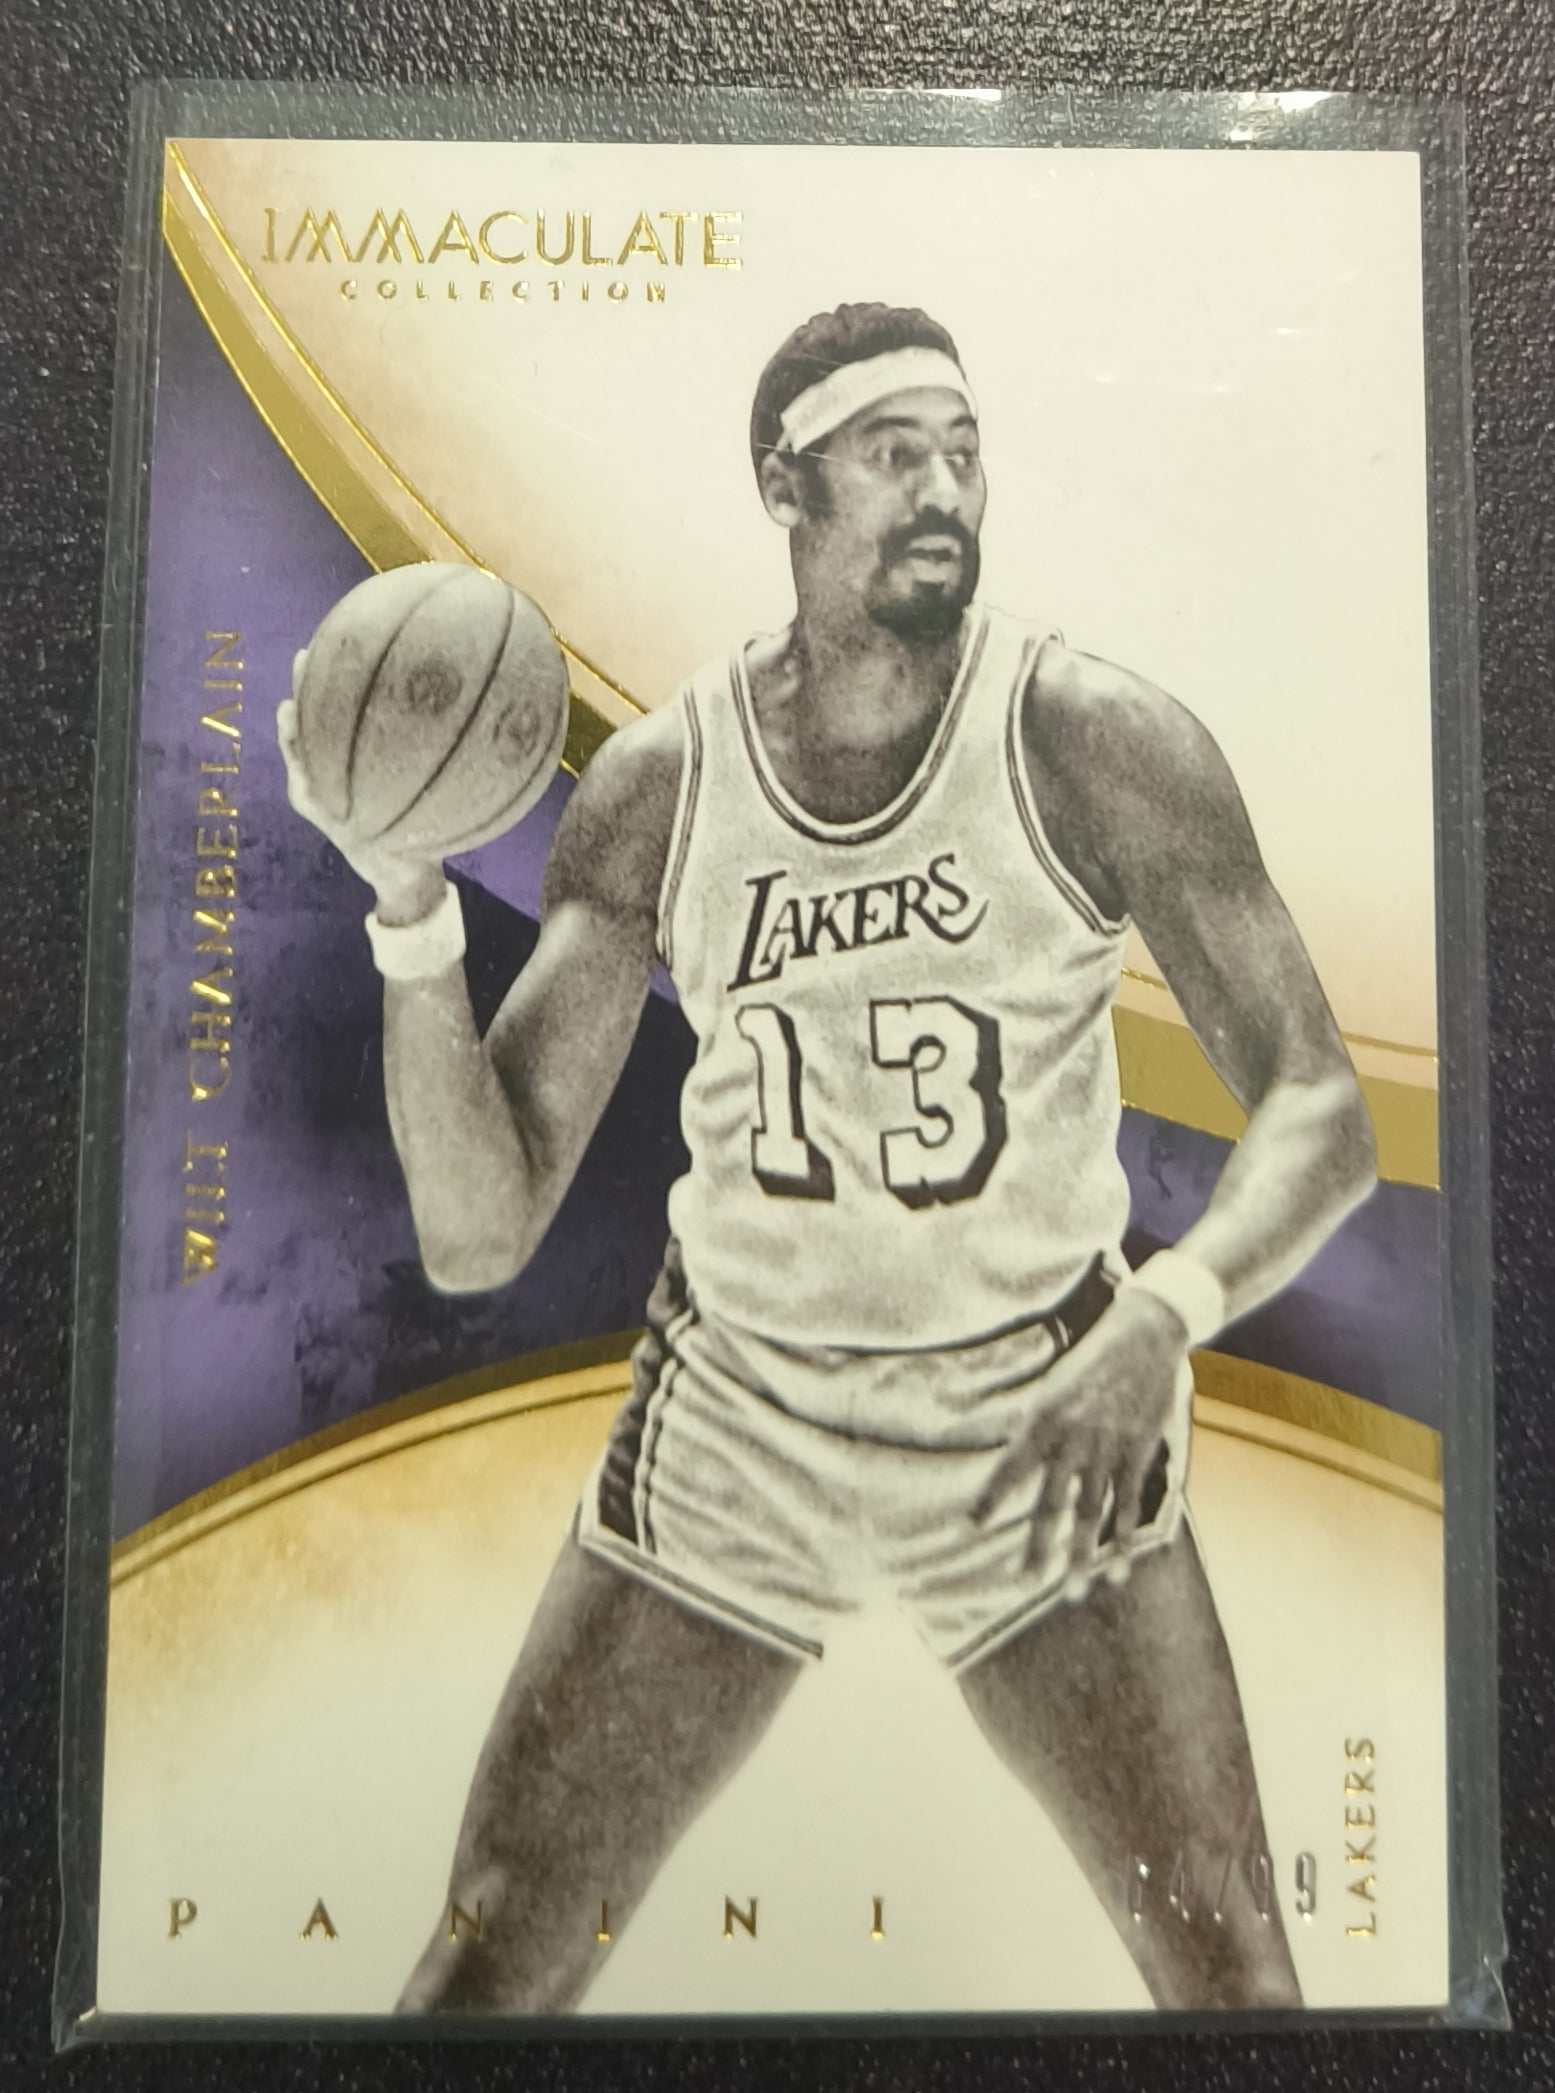 2012-13 Immaculate Collection #48 Wilt Chamberlain /99 -